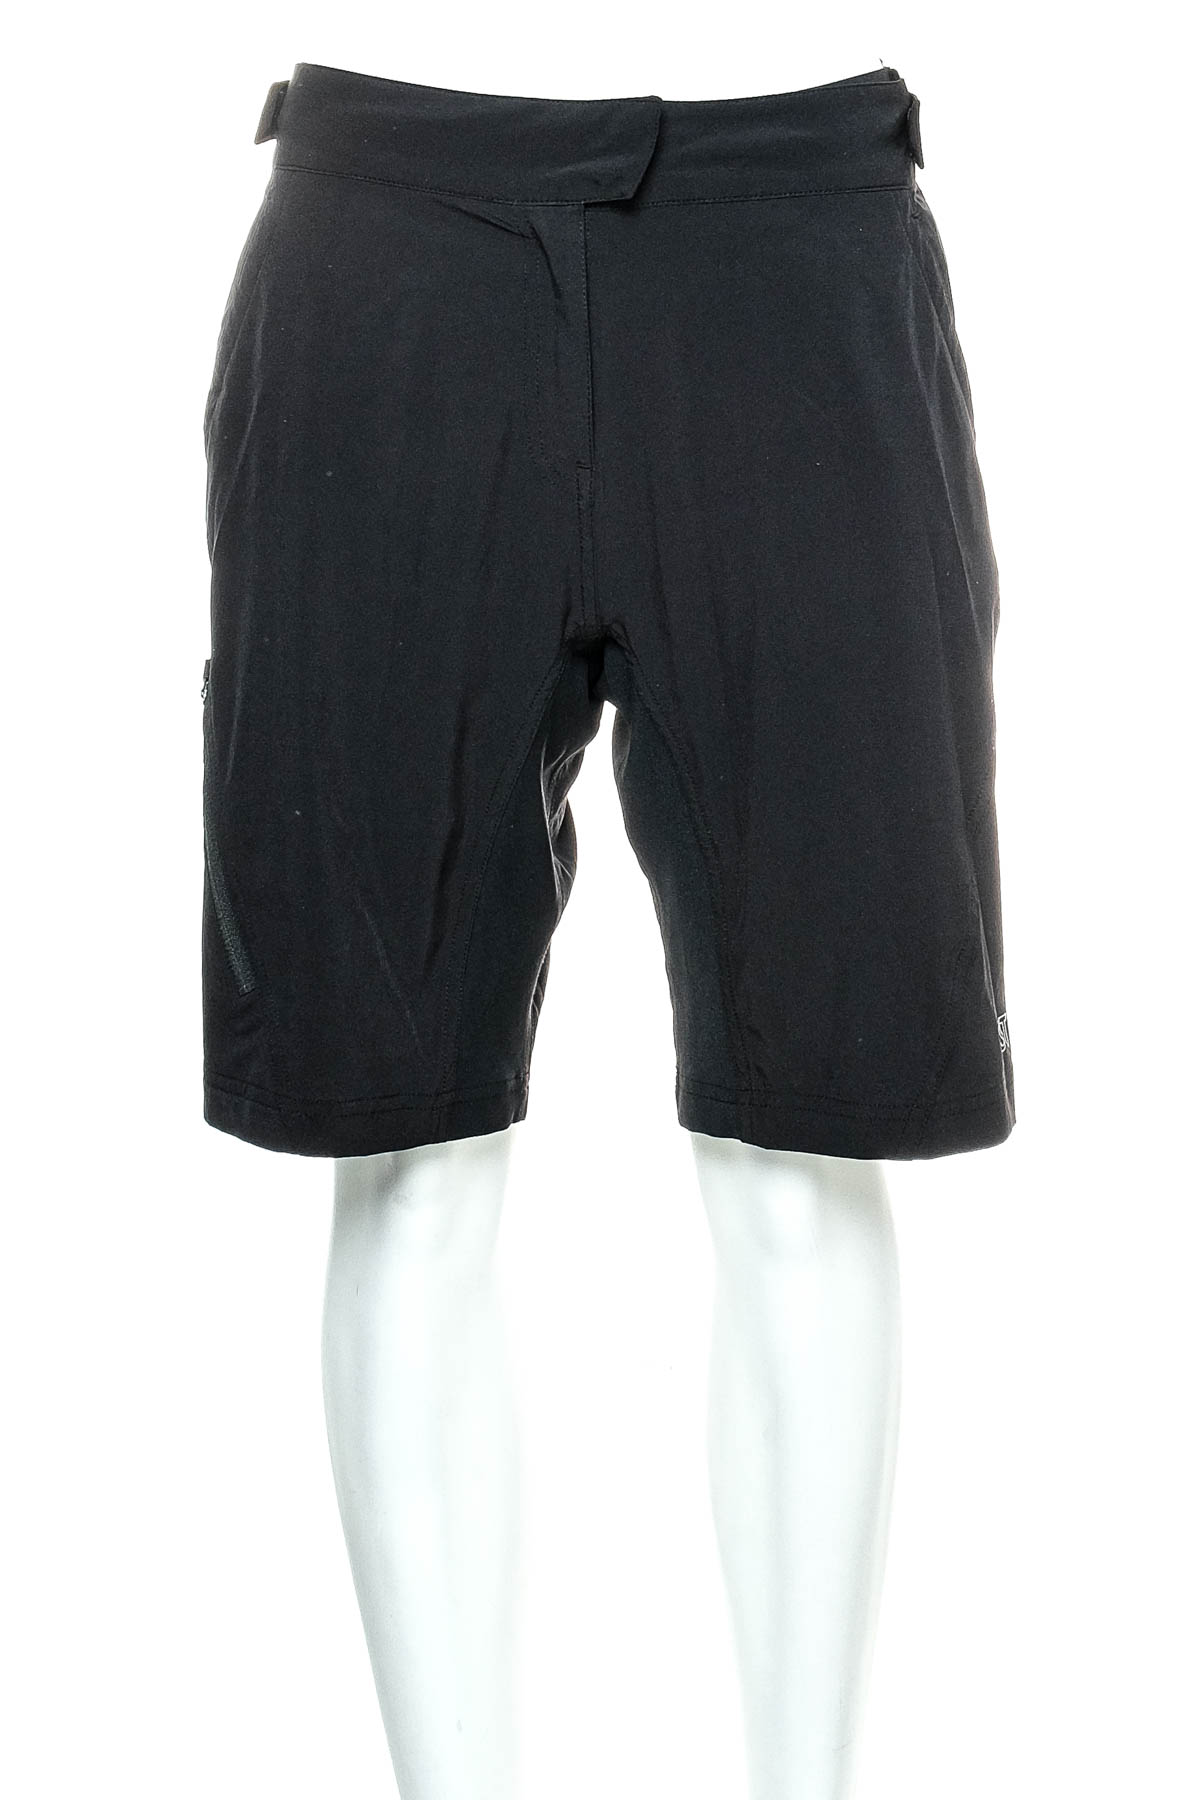 Female shorts for cycling - STOIC - 0